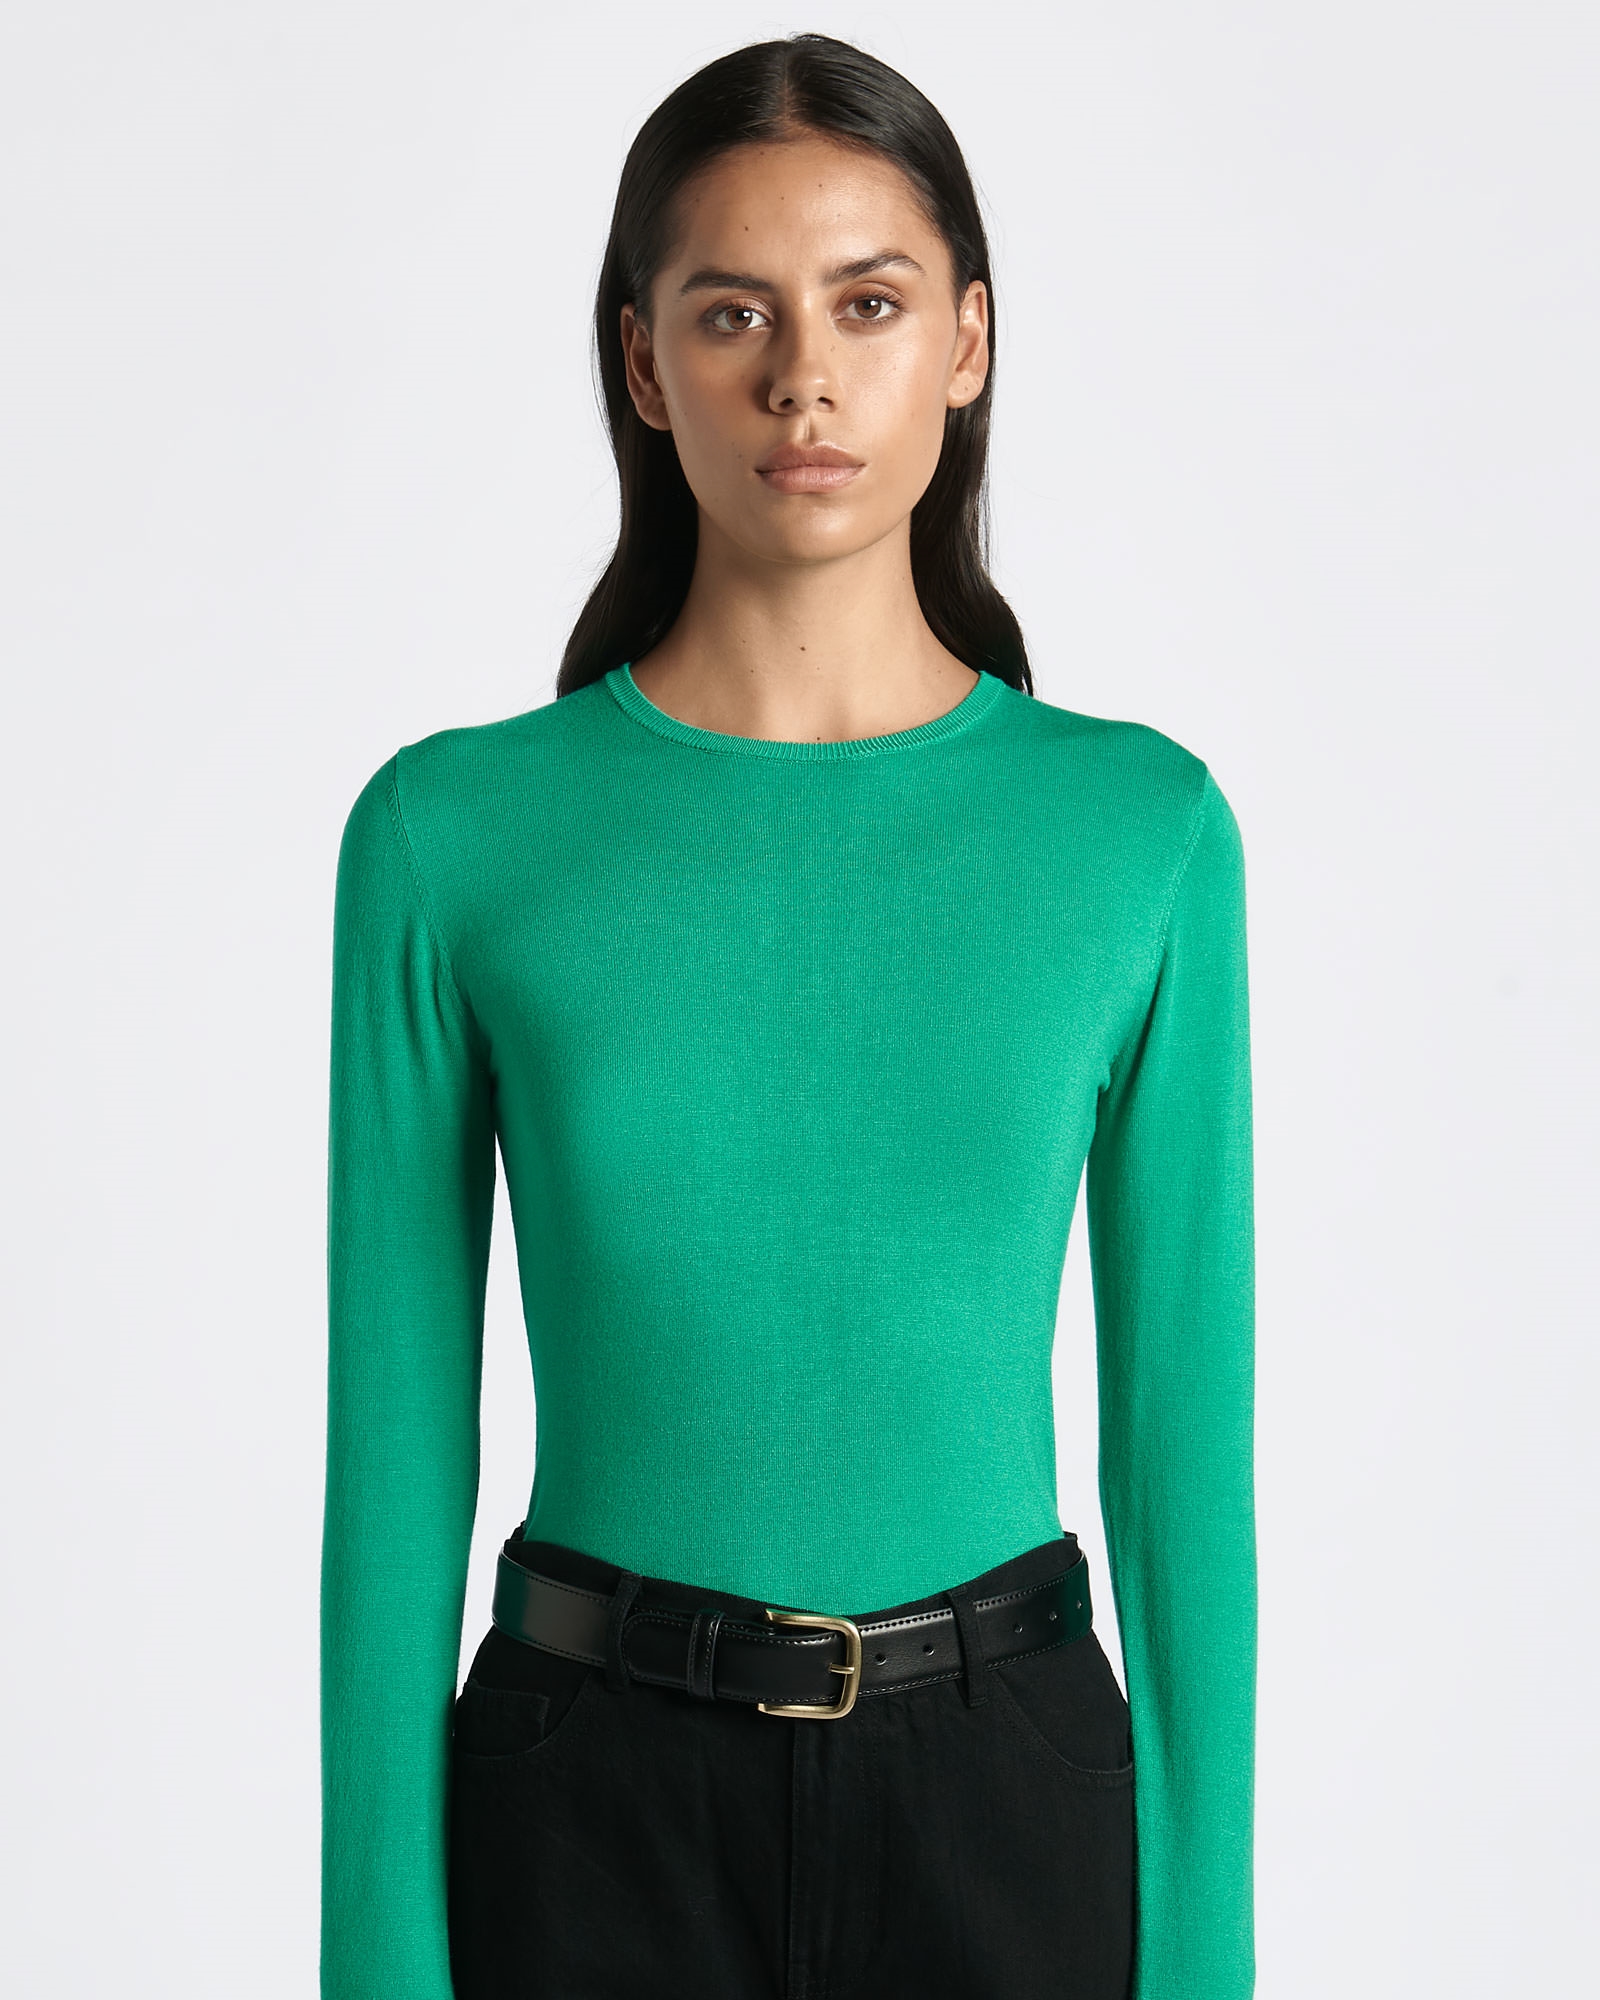 New Arrivals | Long Sleeve Round Neck Knit | 335 Emerald